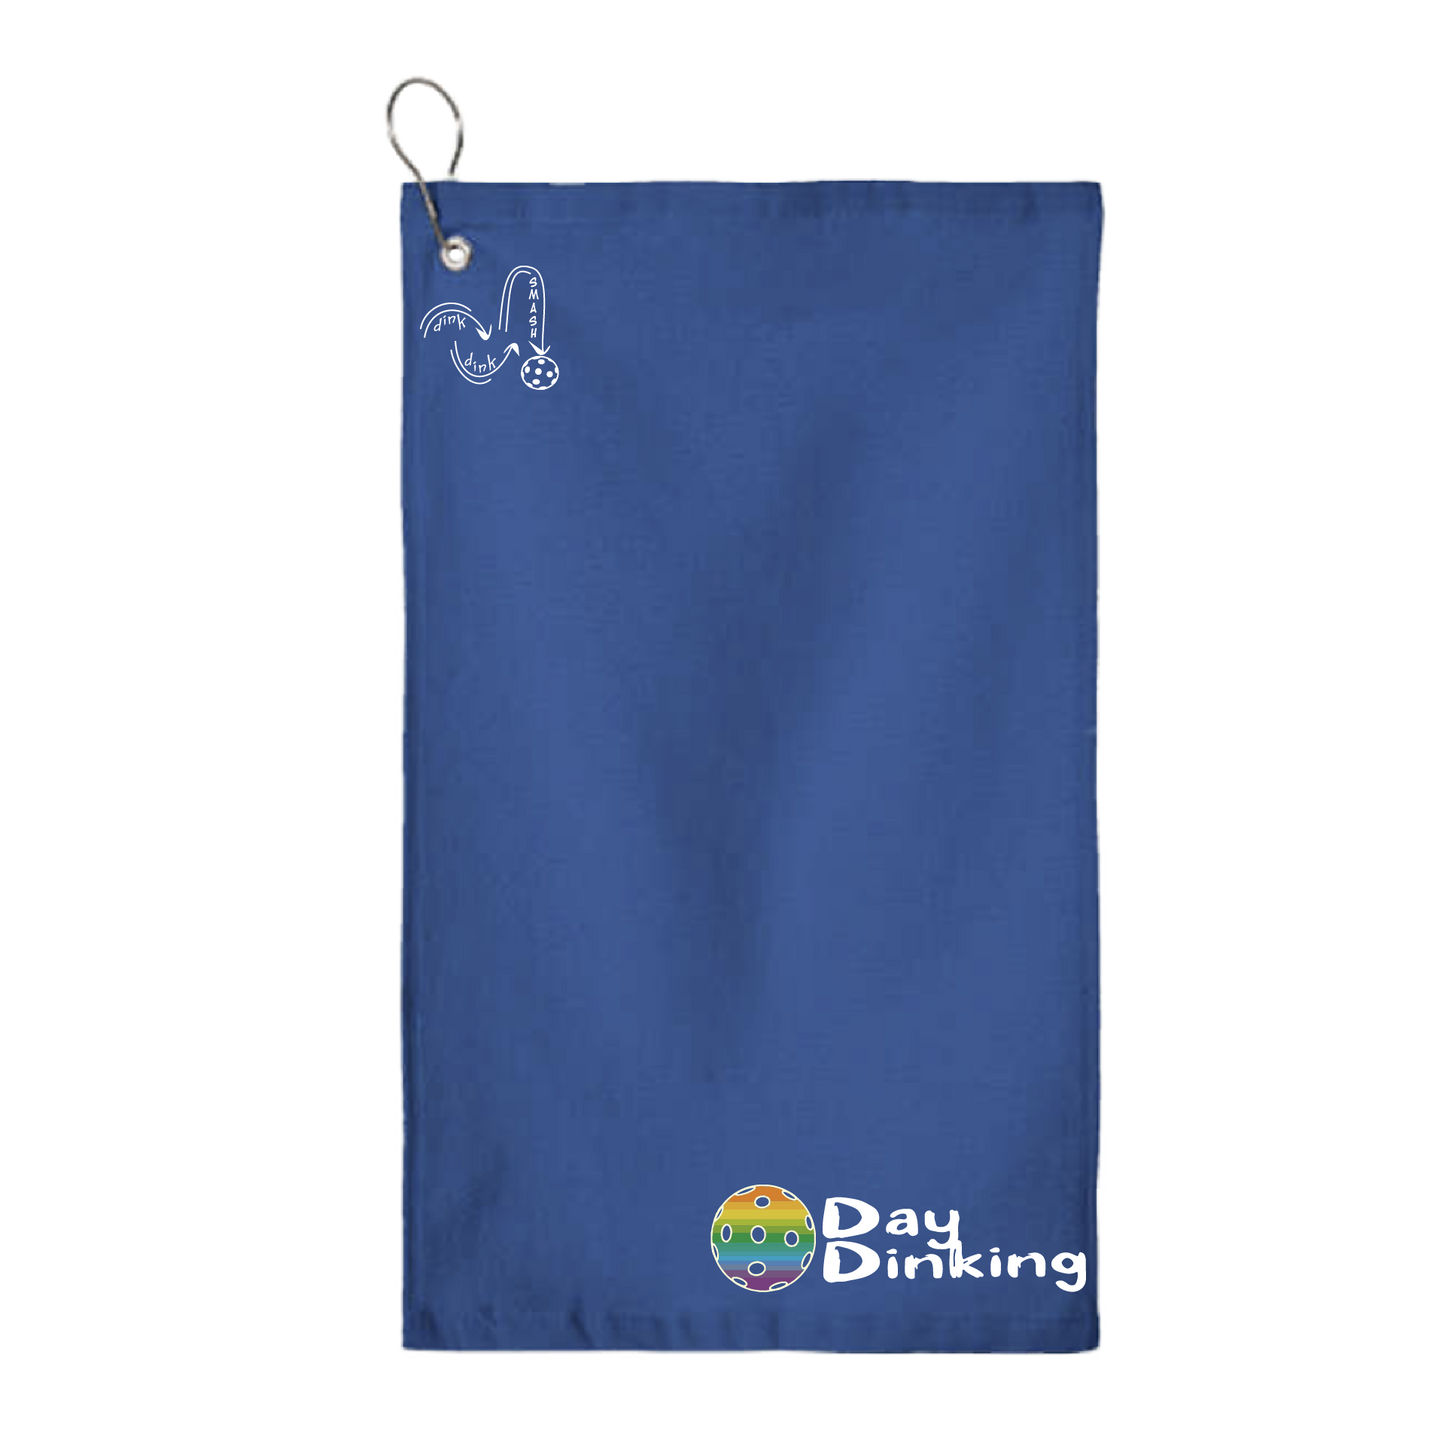 This Day Dinking pickleball towel is crafted with cotton terry velour for optimal performance. It features grommets, hooks, and hemmed edges for added durability. It's perfect for completing your pickleball gear, and an ideal gift for friends and tournaments. The towel is designed to be both absorbent and lightweight, so you can remain dry and comfortable while you play. Plus, its long-lasting power will keep it looking great and working well for many games to come.